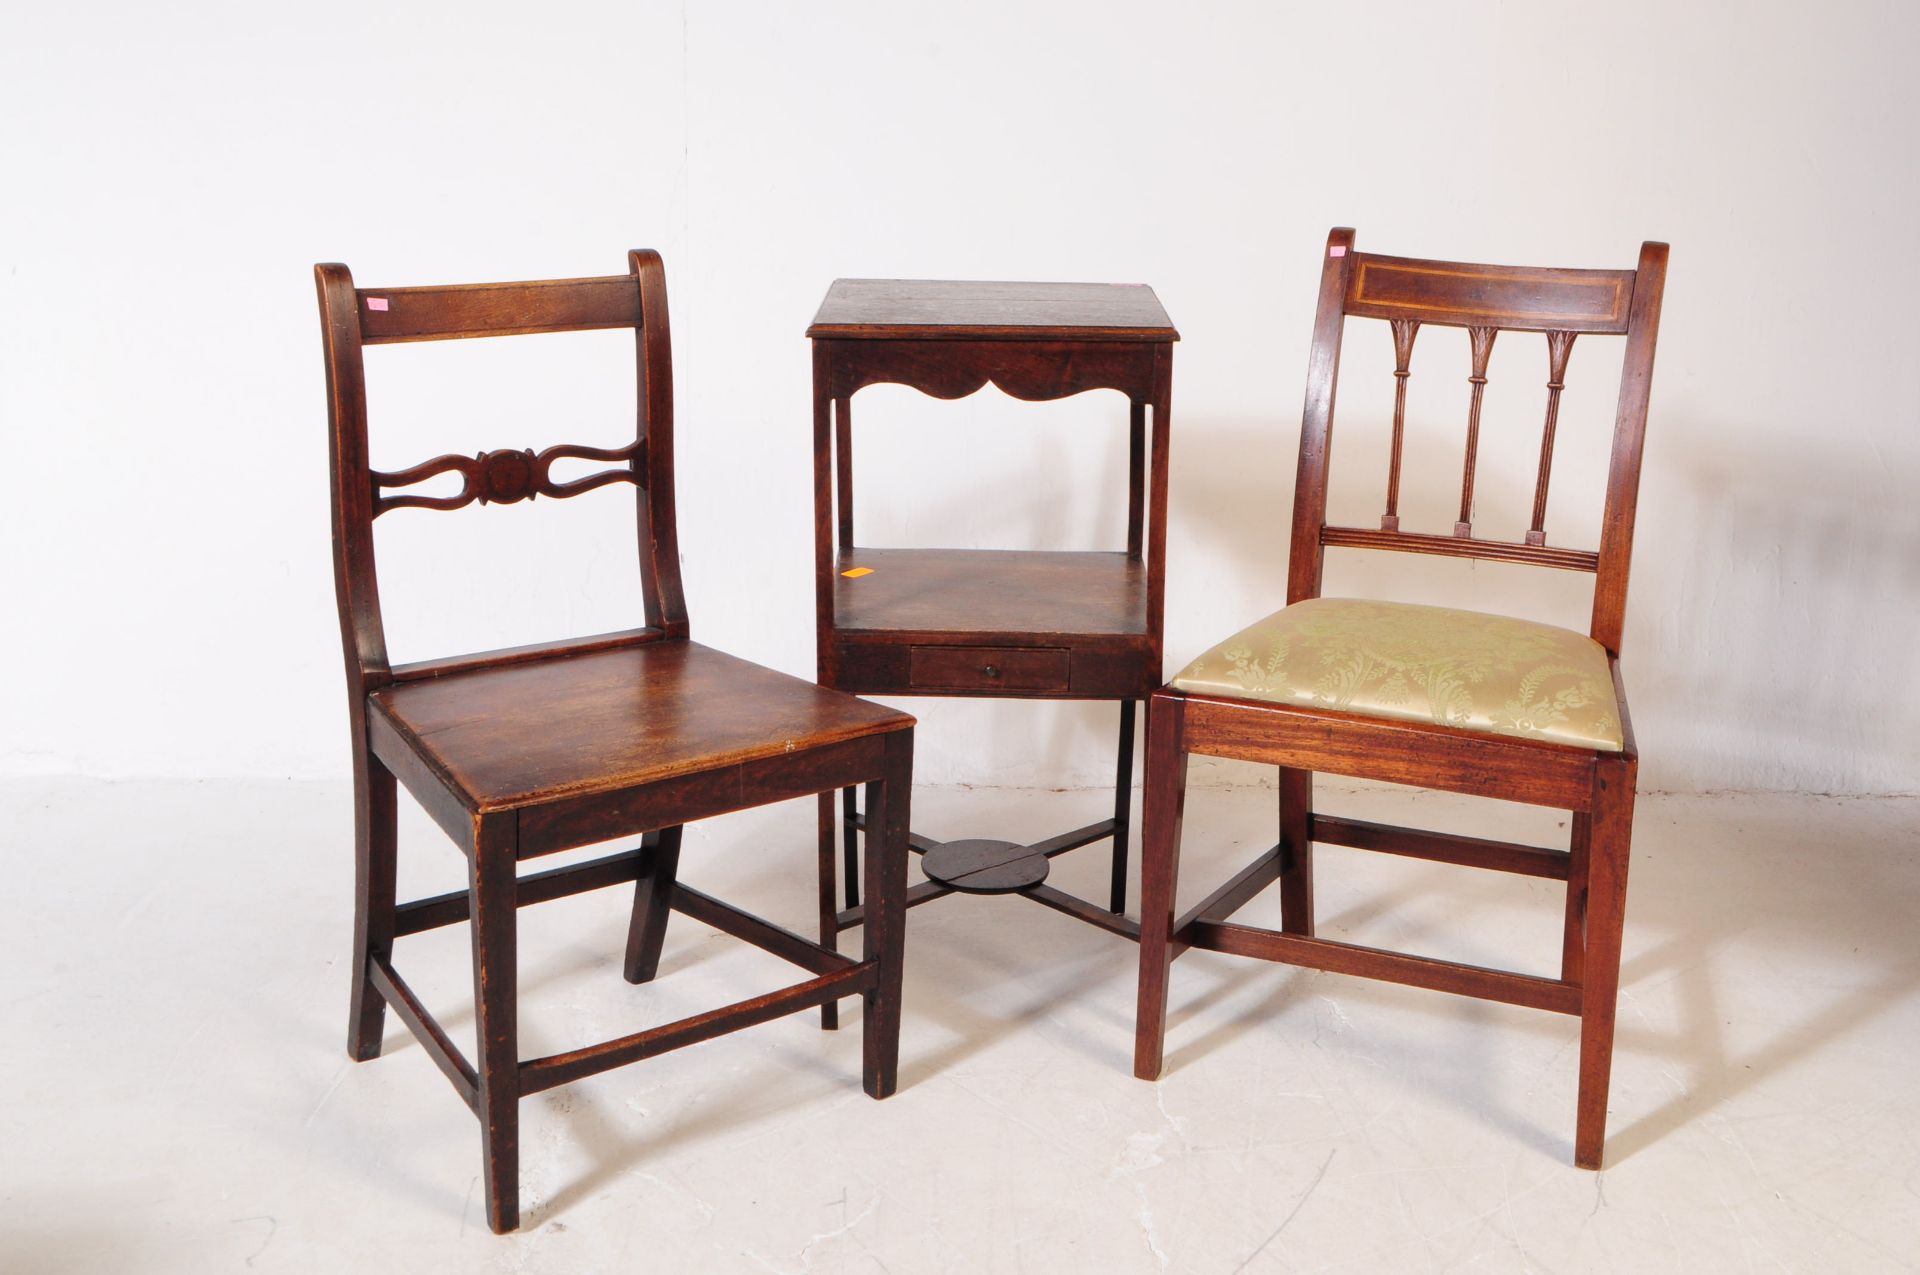 19TH CENTURY NORTH COUNTRY OAK CHAIR & ANOTHER